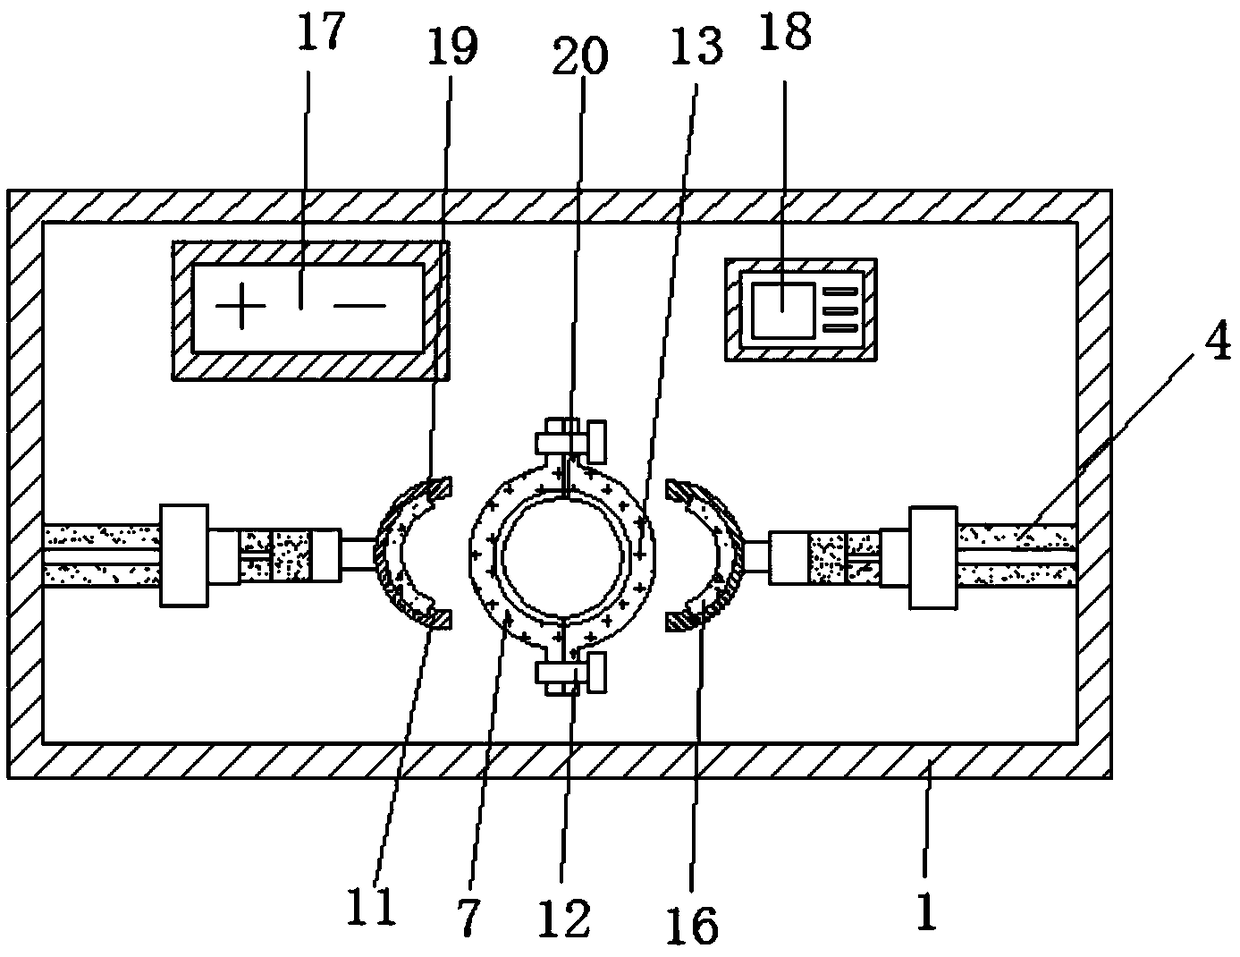 Rapid polishing device for communication device production